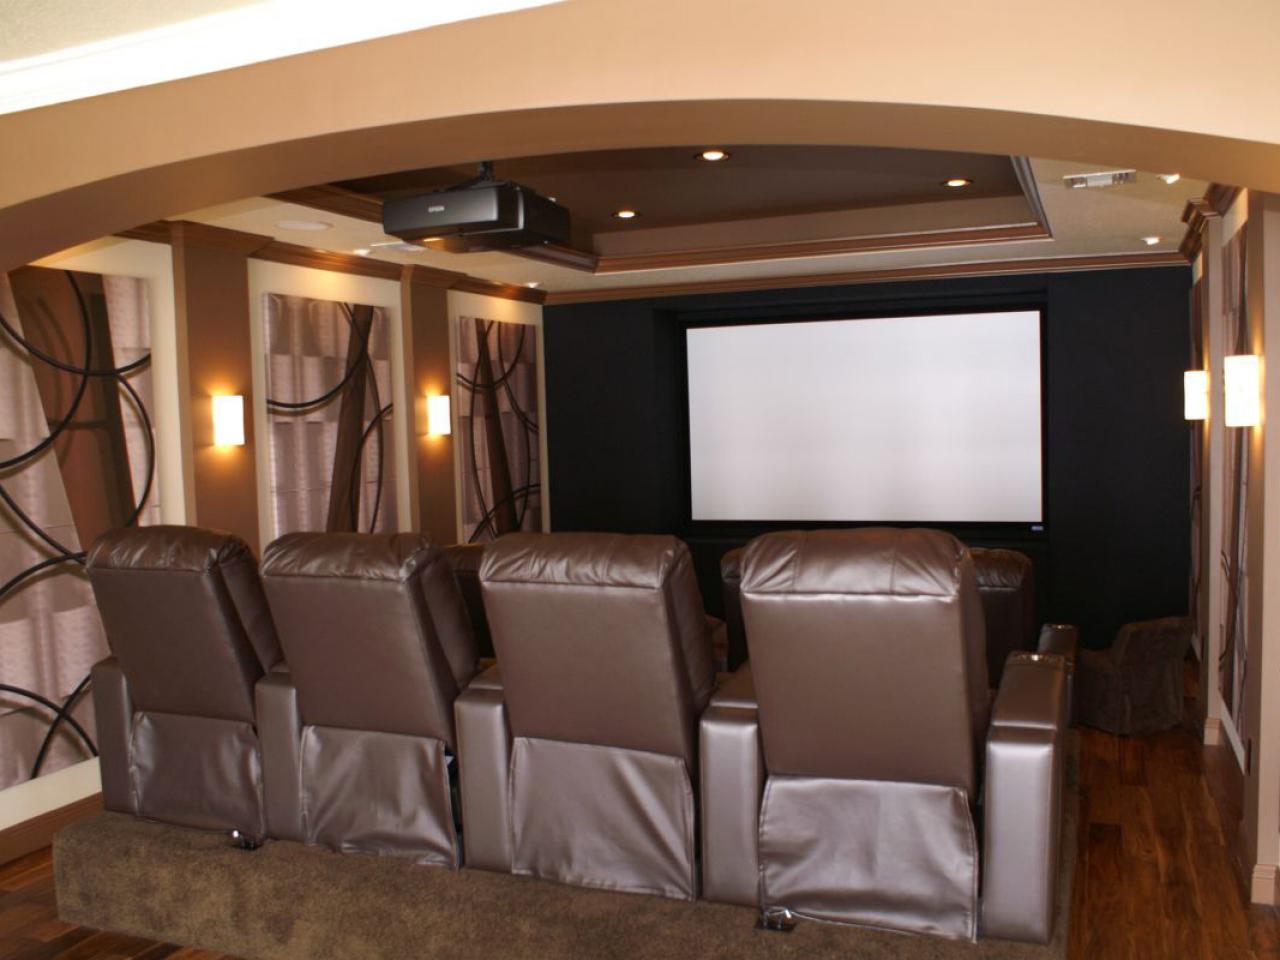 How to Build a Home Theater | HGTV